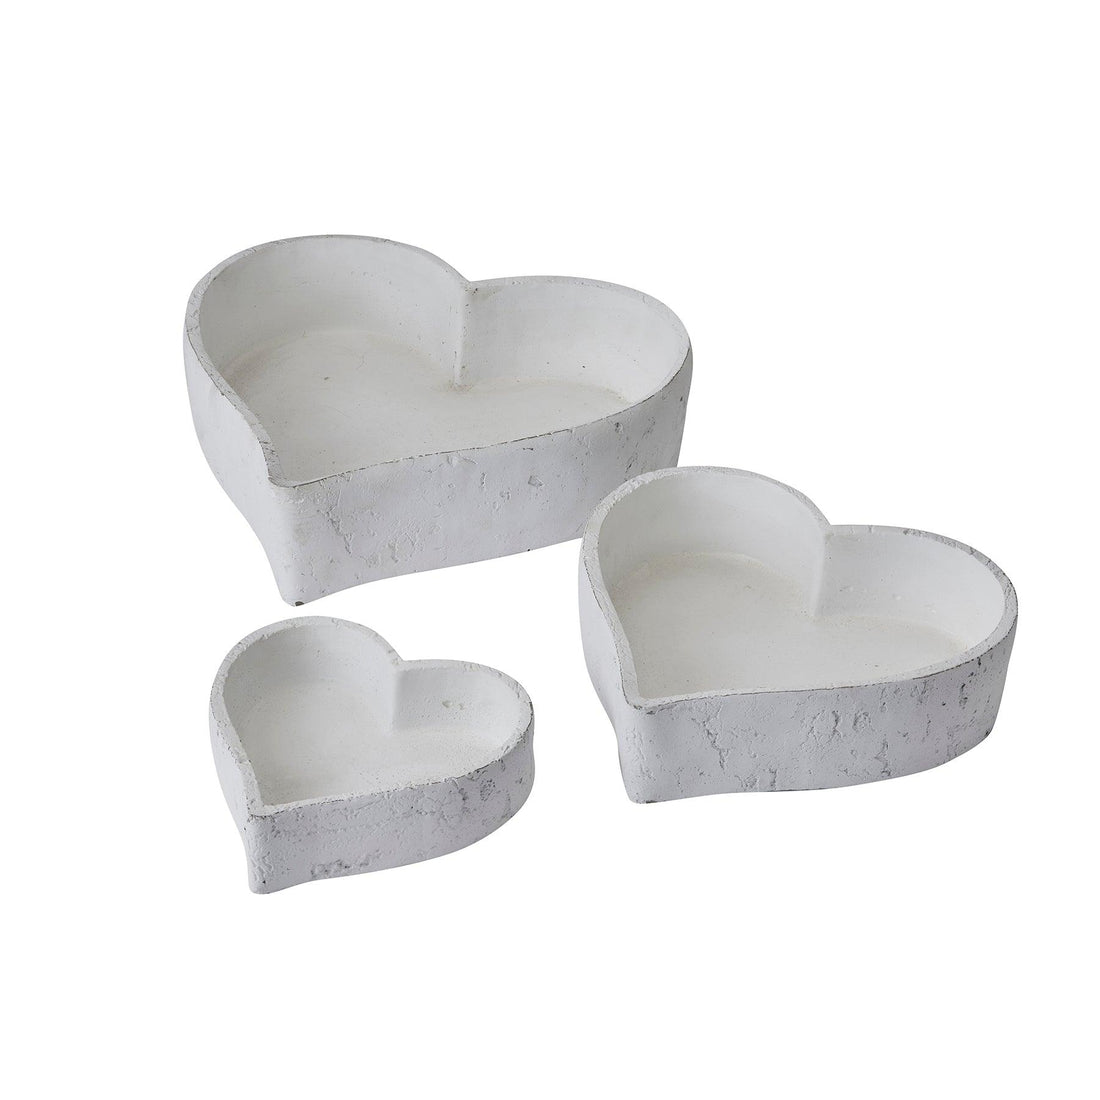 Set Of Three Large Matt White Ceramic Dishes - £79.95 - Gifts & Accessories > Kitchen And Tableware > Ornaments 